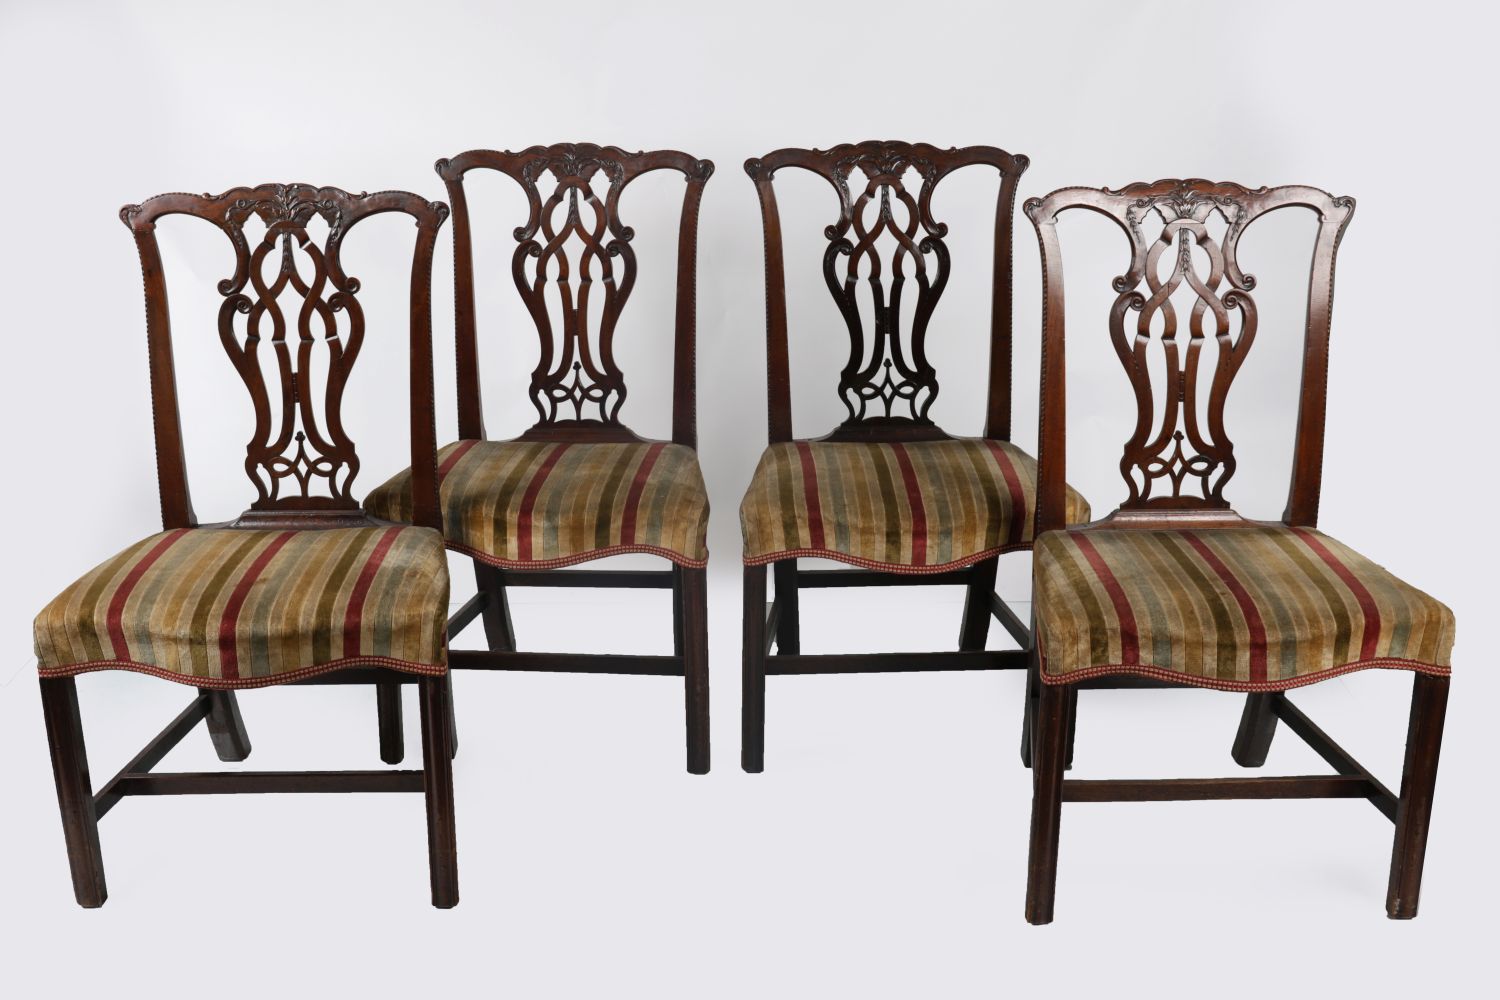 SET 4 18TH-CENTURY CHIPPENDALE CHAIRS